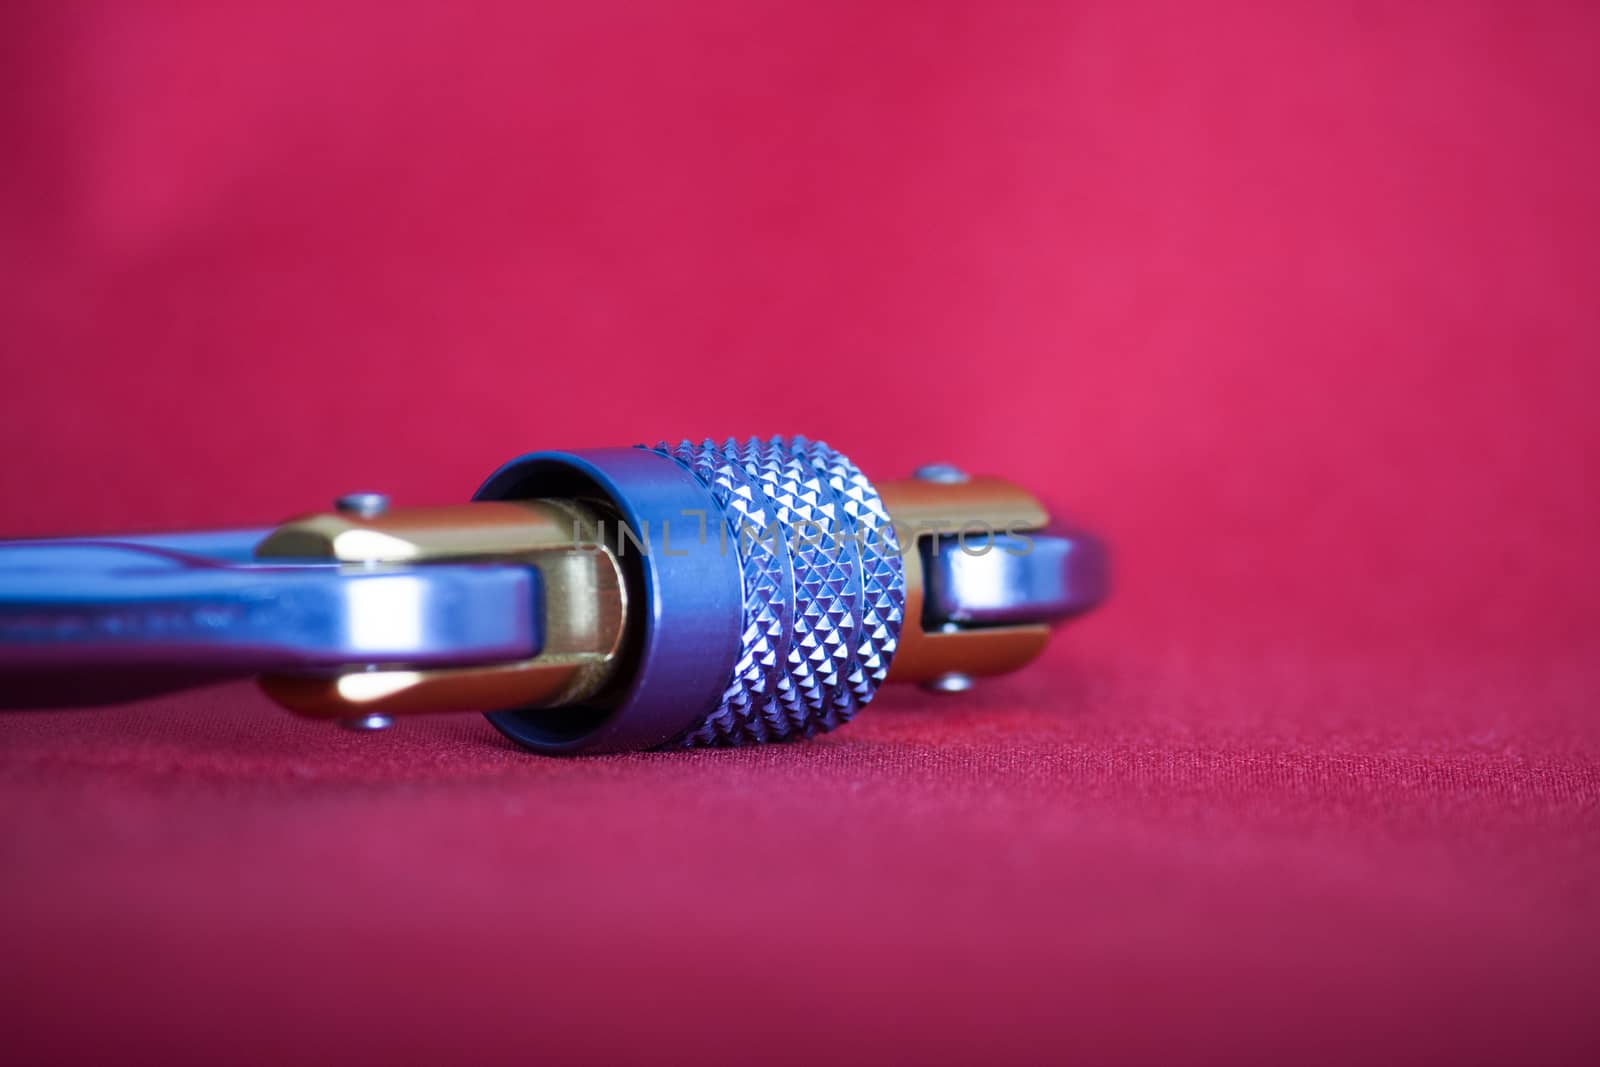 Angle close-up on a locking mechanism of an alluminium climbing carabiner on red background